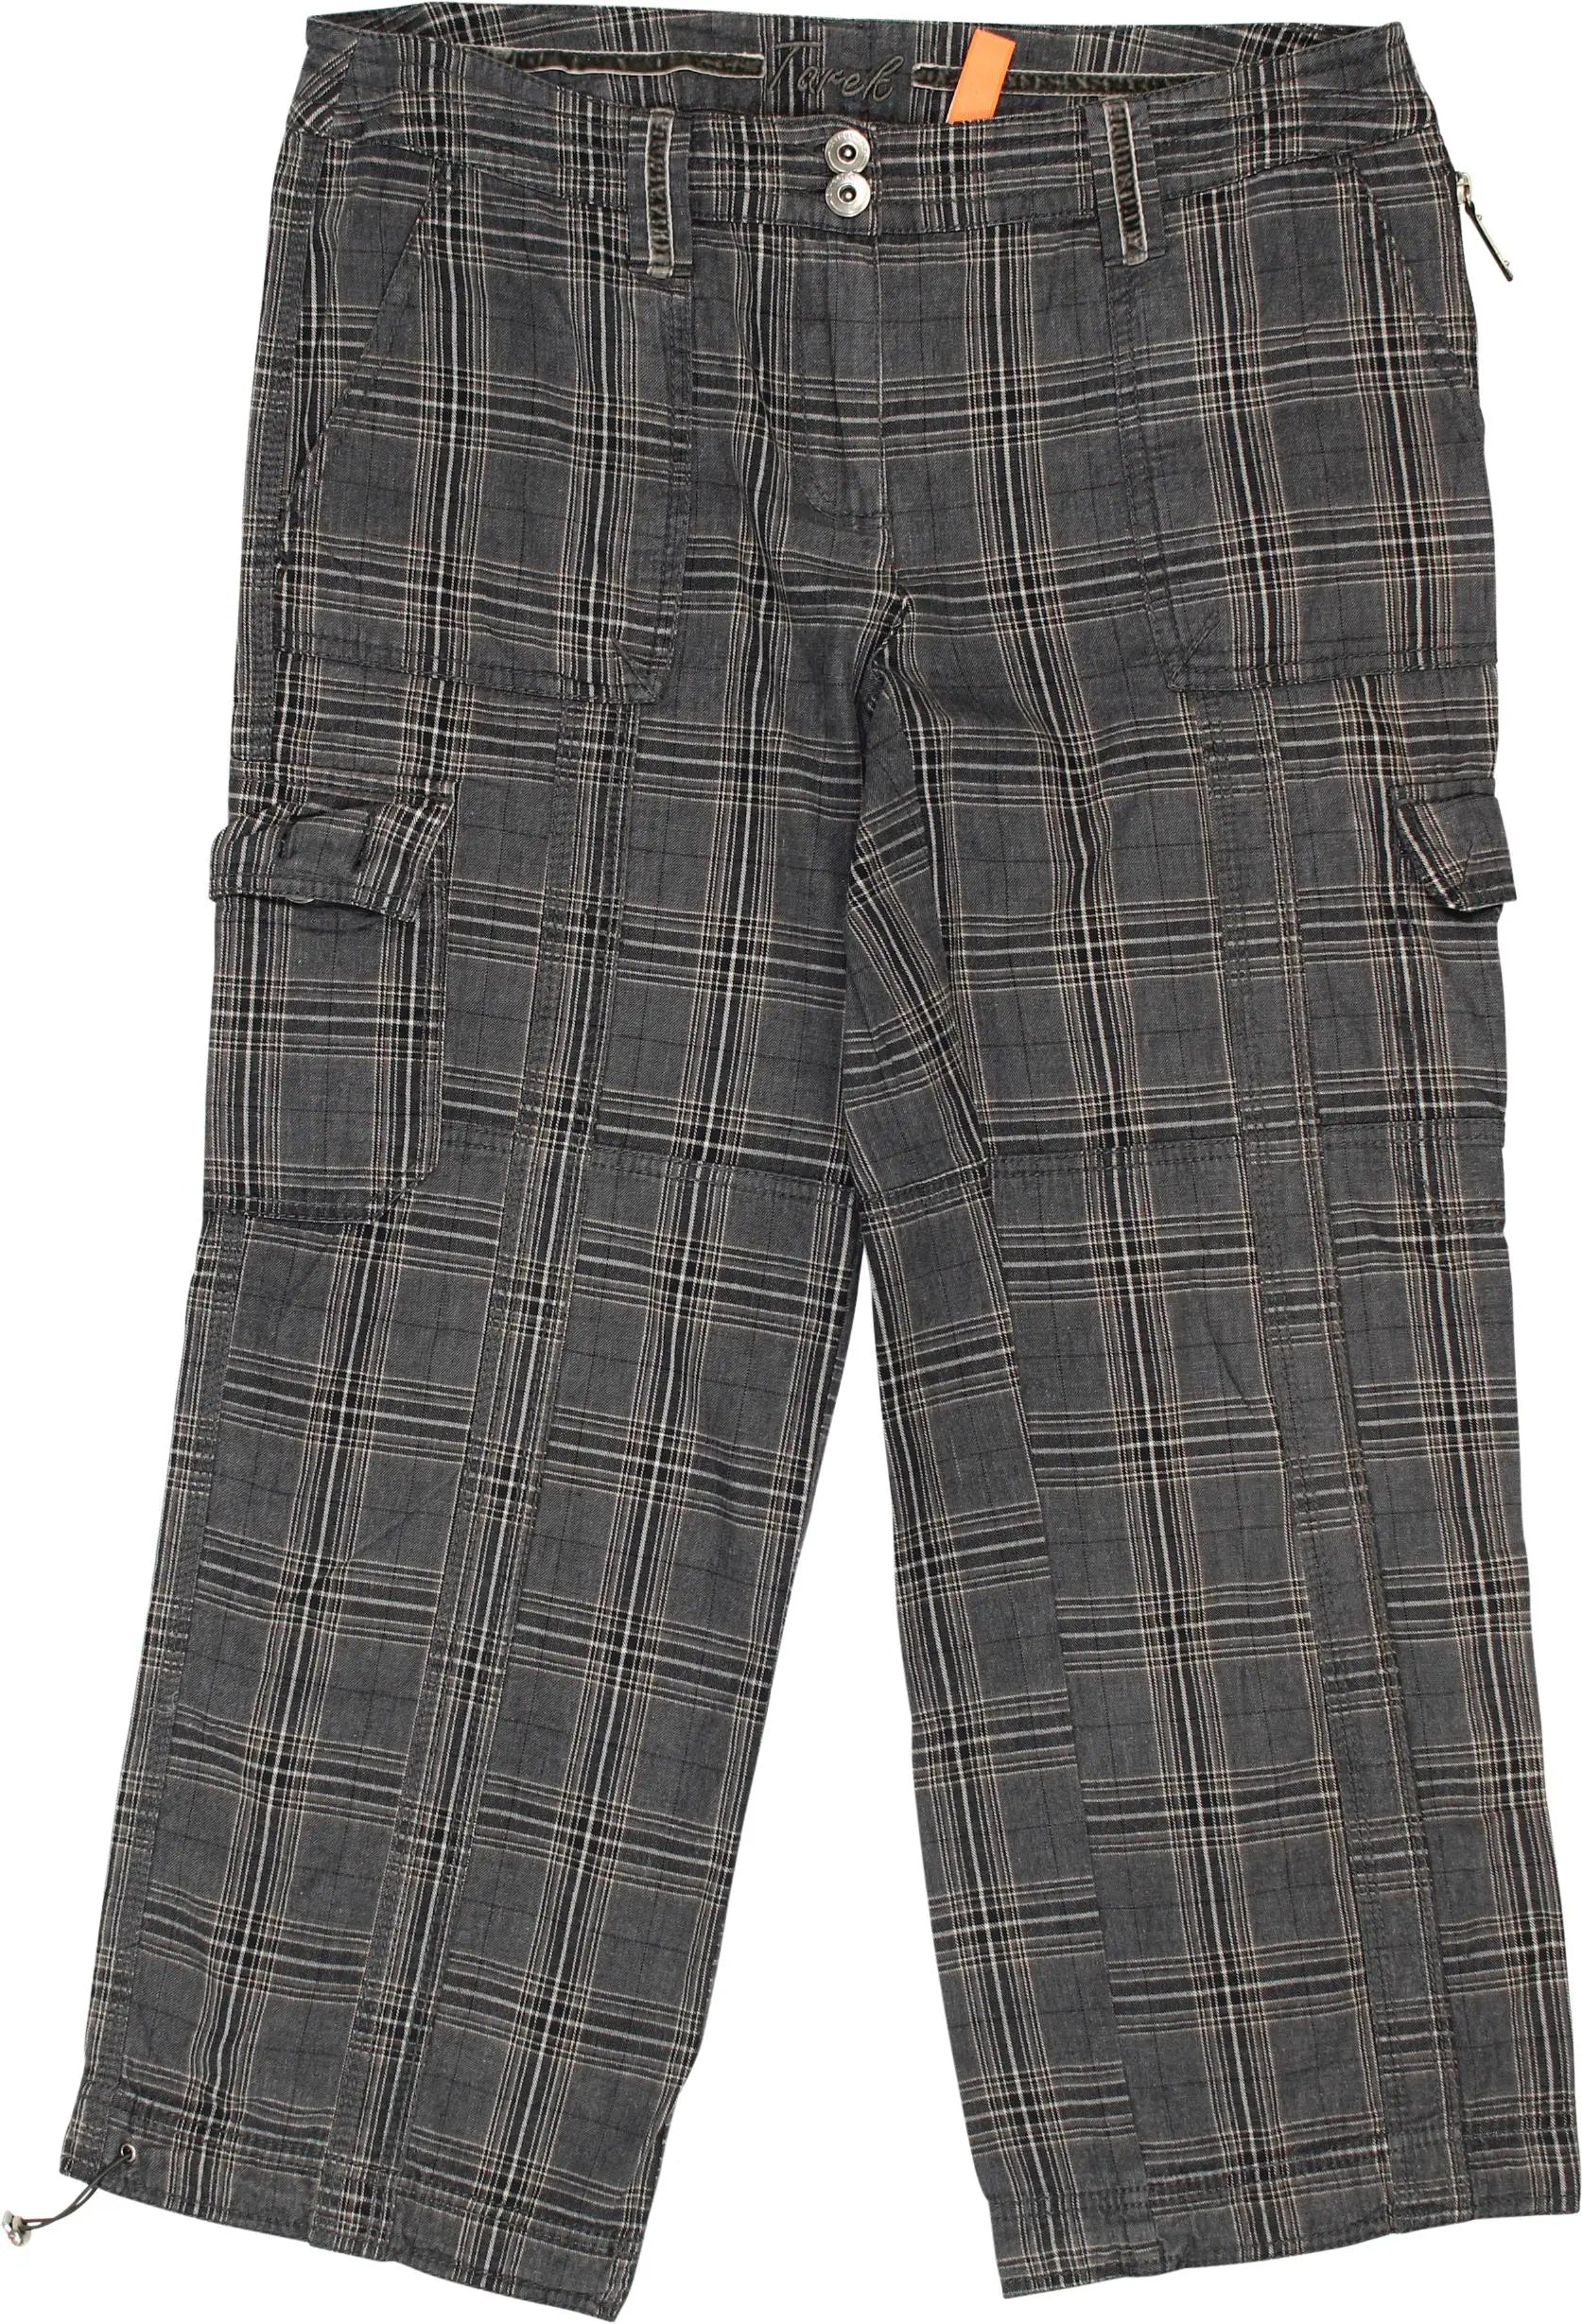 Street One - Checkered Pants- ThriftTale.com - Vintage and second handclothing